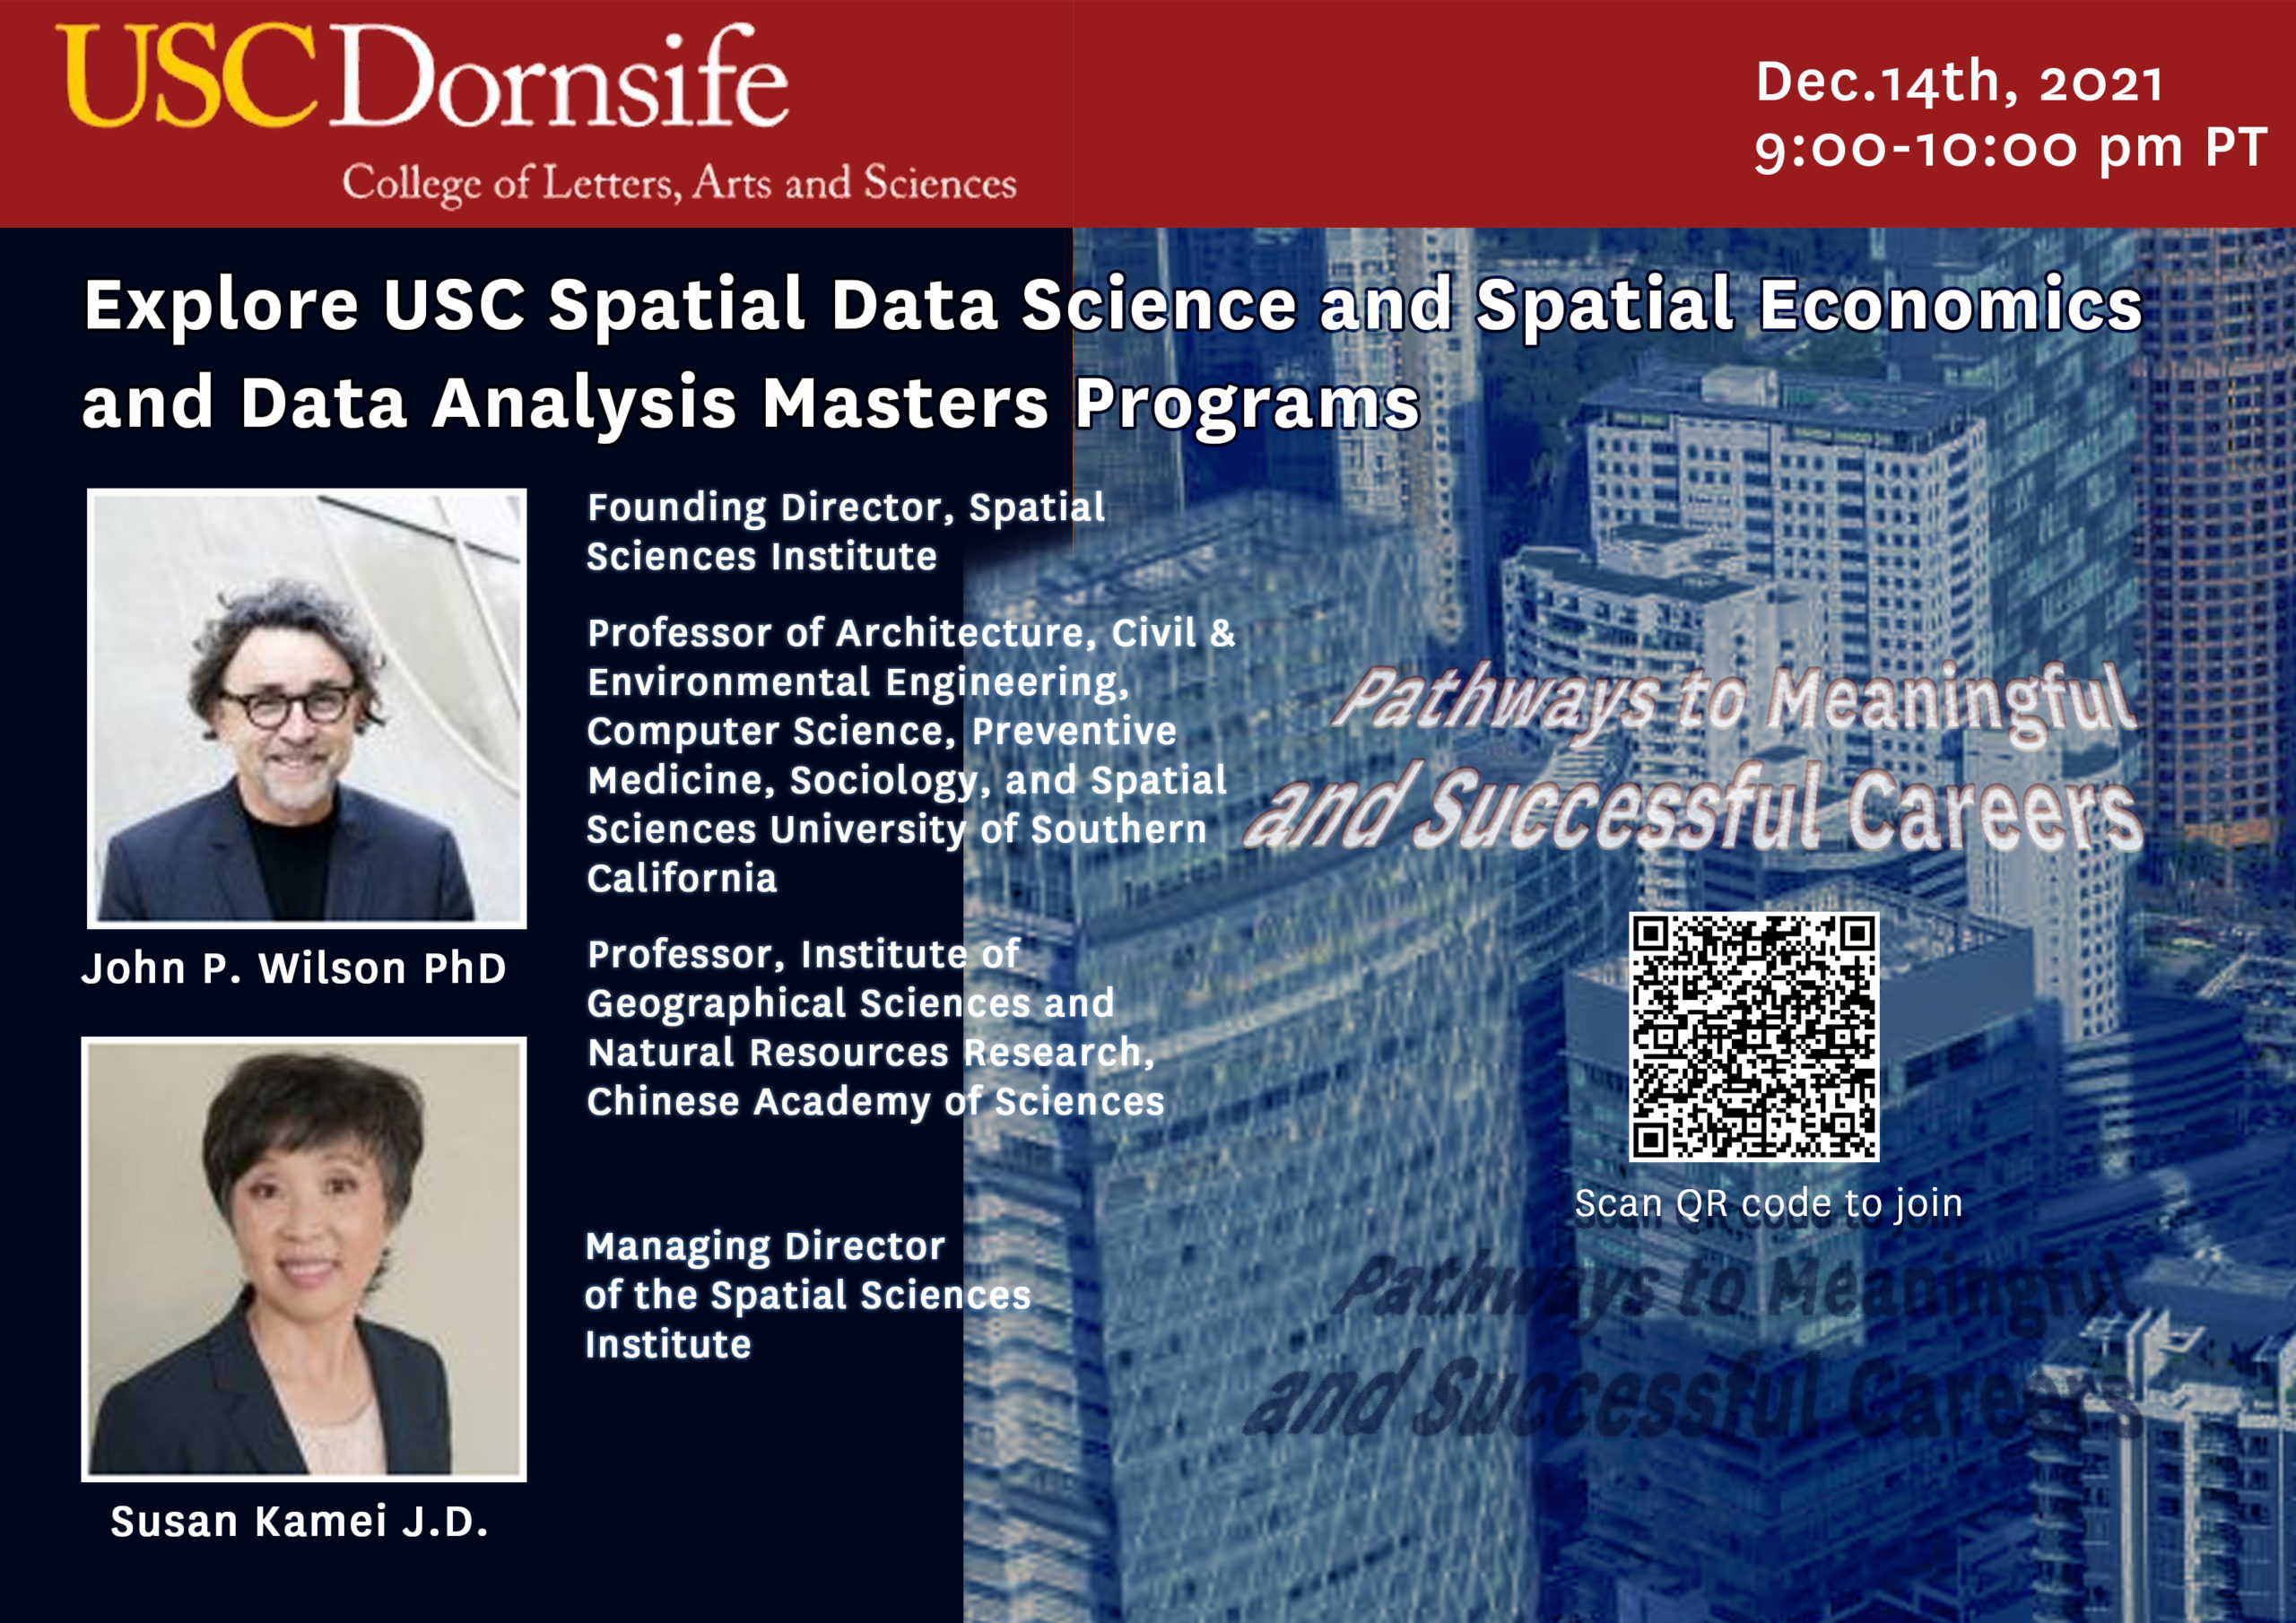 USC Spatial Data Science and Spatial Economics and Data Analysis Masters Programs: Pathways to Meaningful and Successful Careers